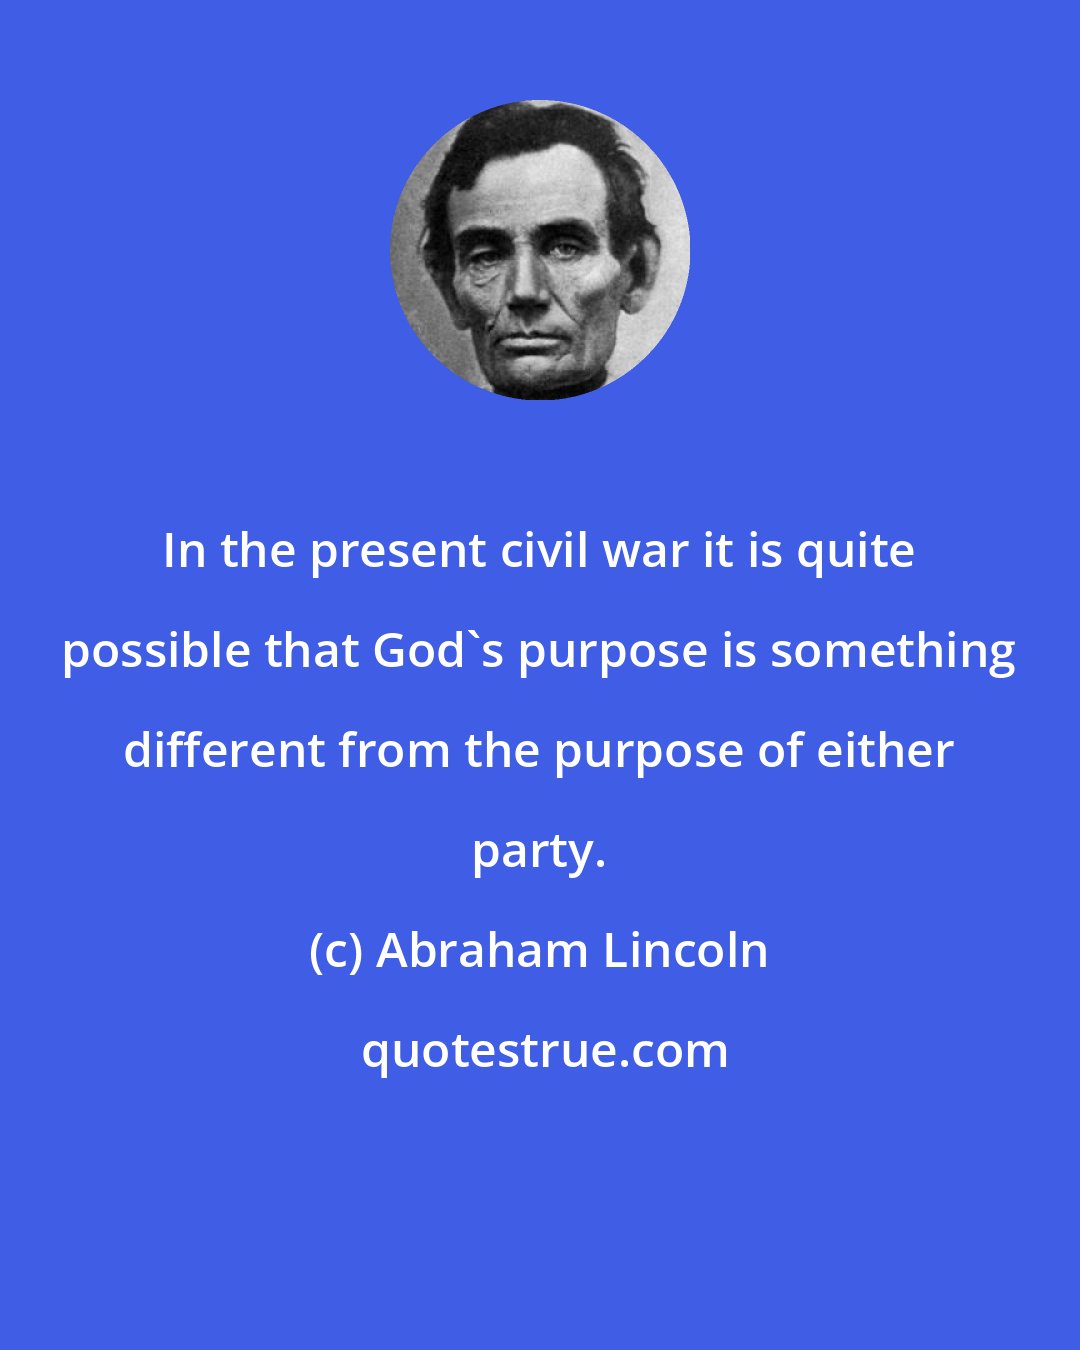 Abraham Lincoln: In the present civil war it is quite possible that God's purpose is something different from the purpose of either party.